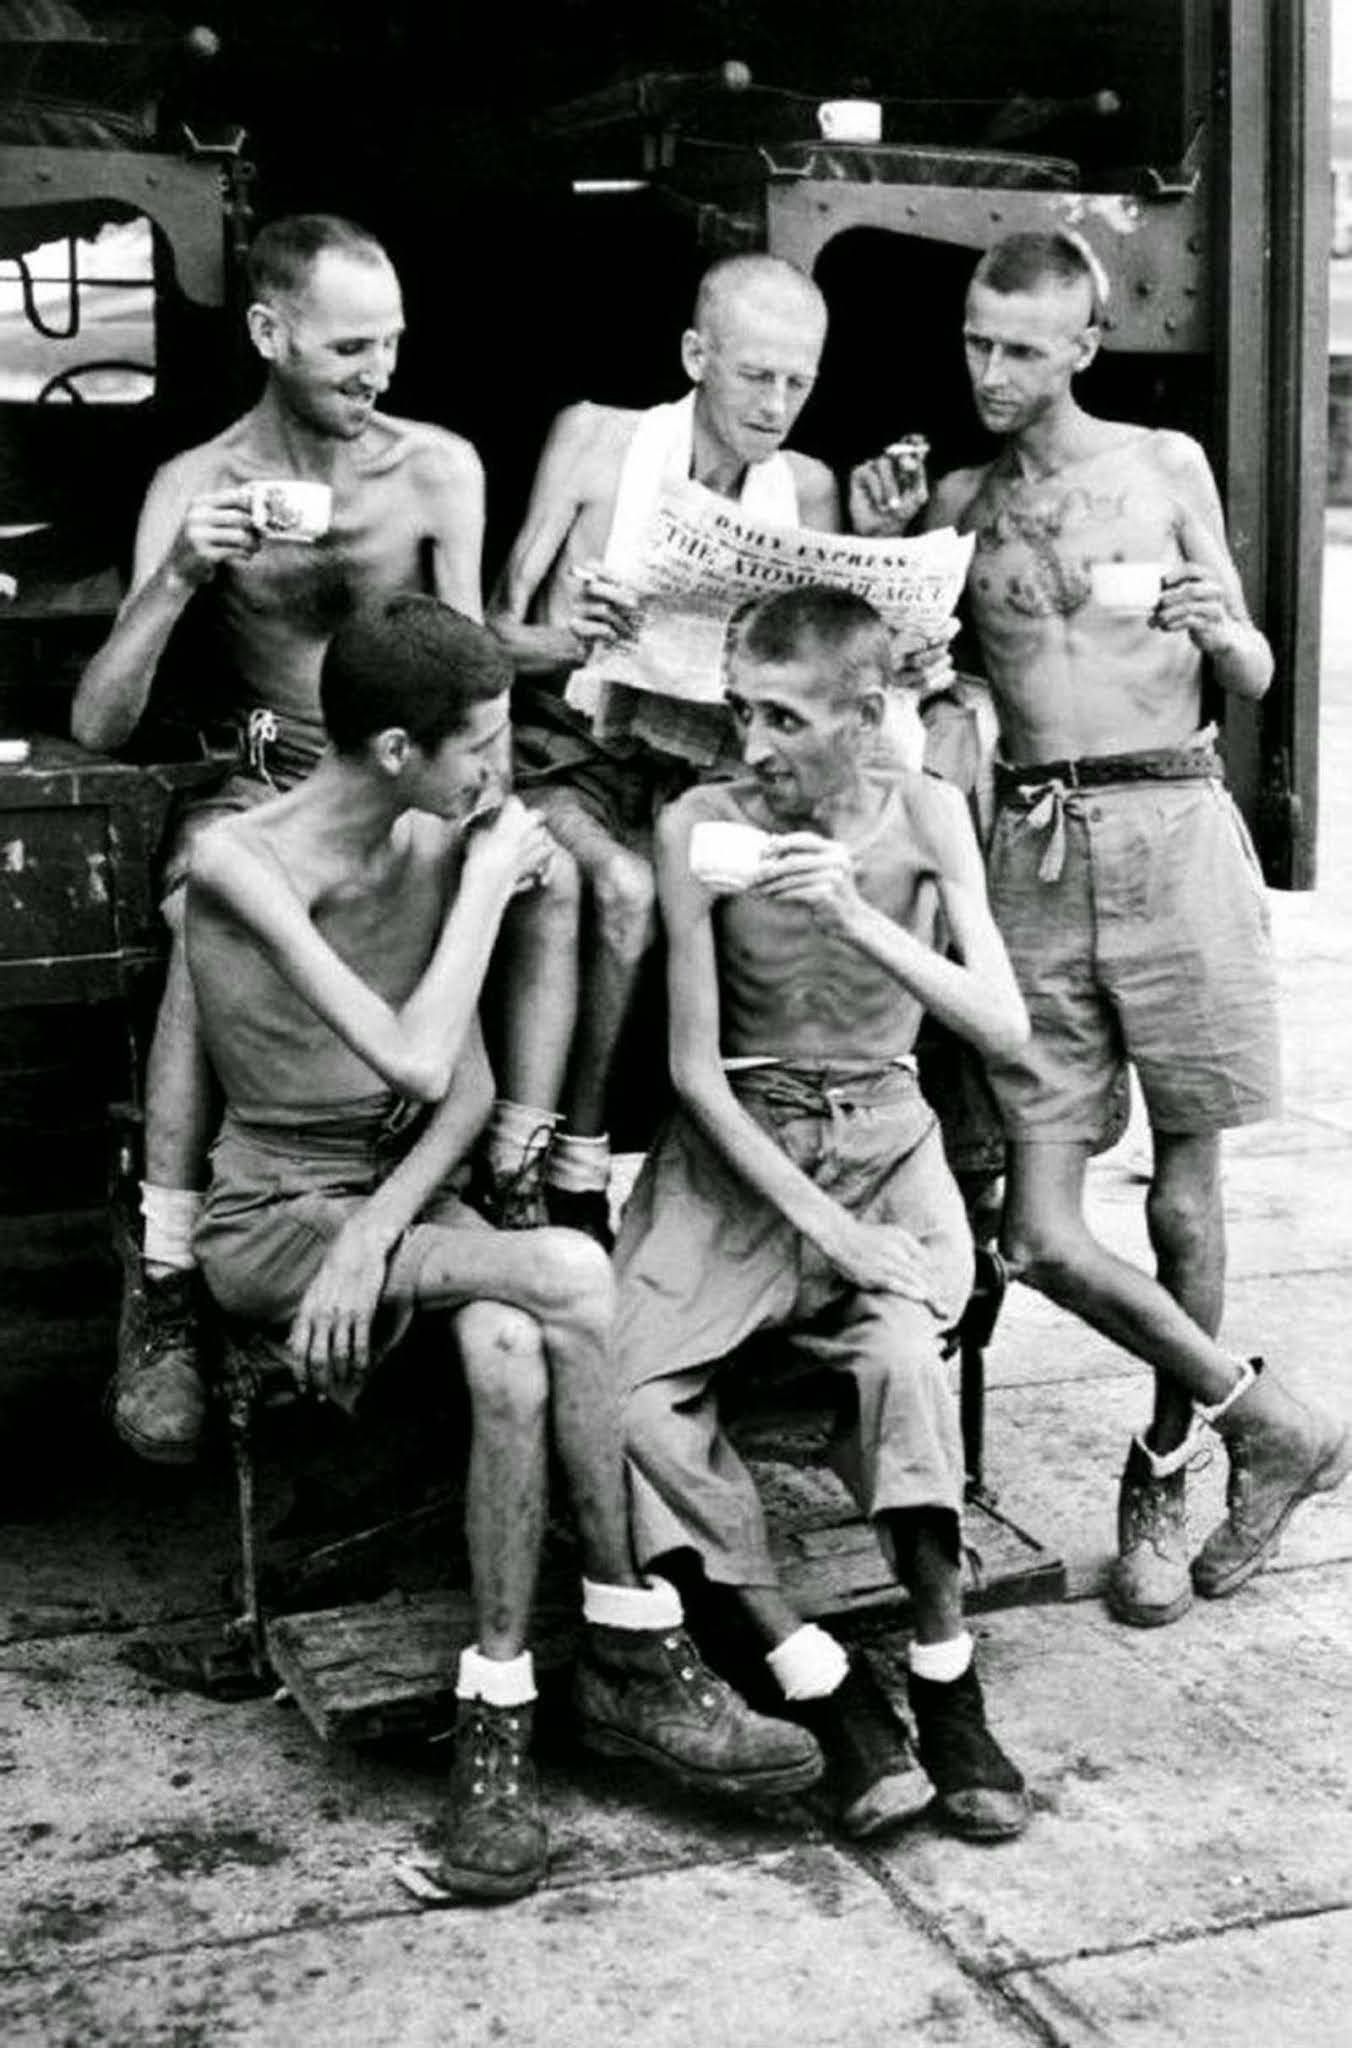 Emaciated British soldiers after their release from Japanese captivity in Singapore, 1945